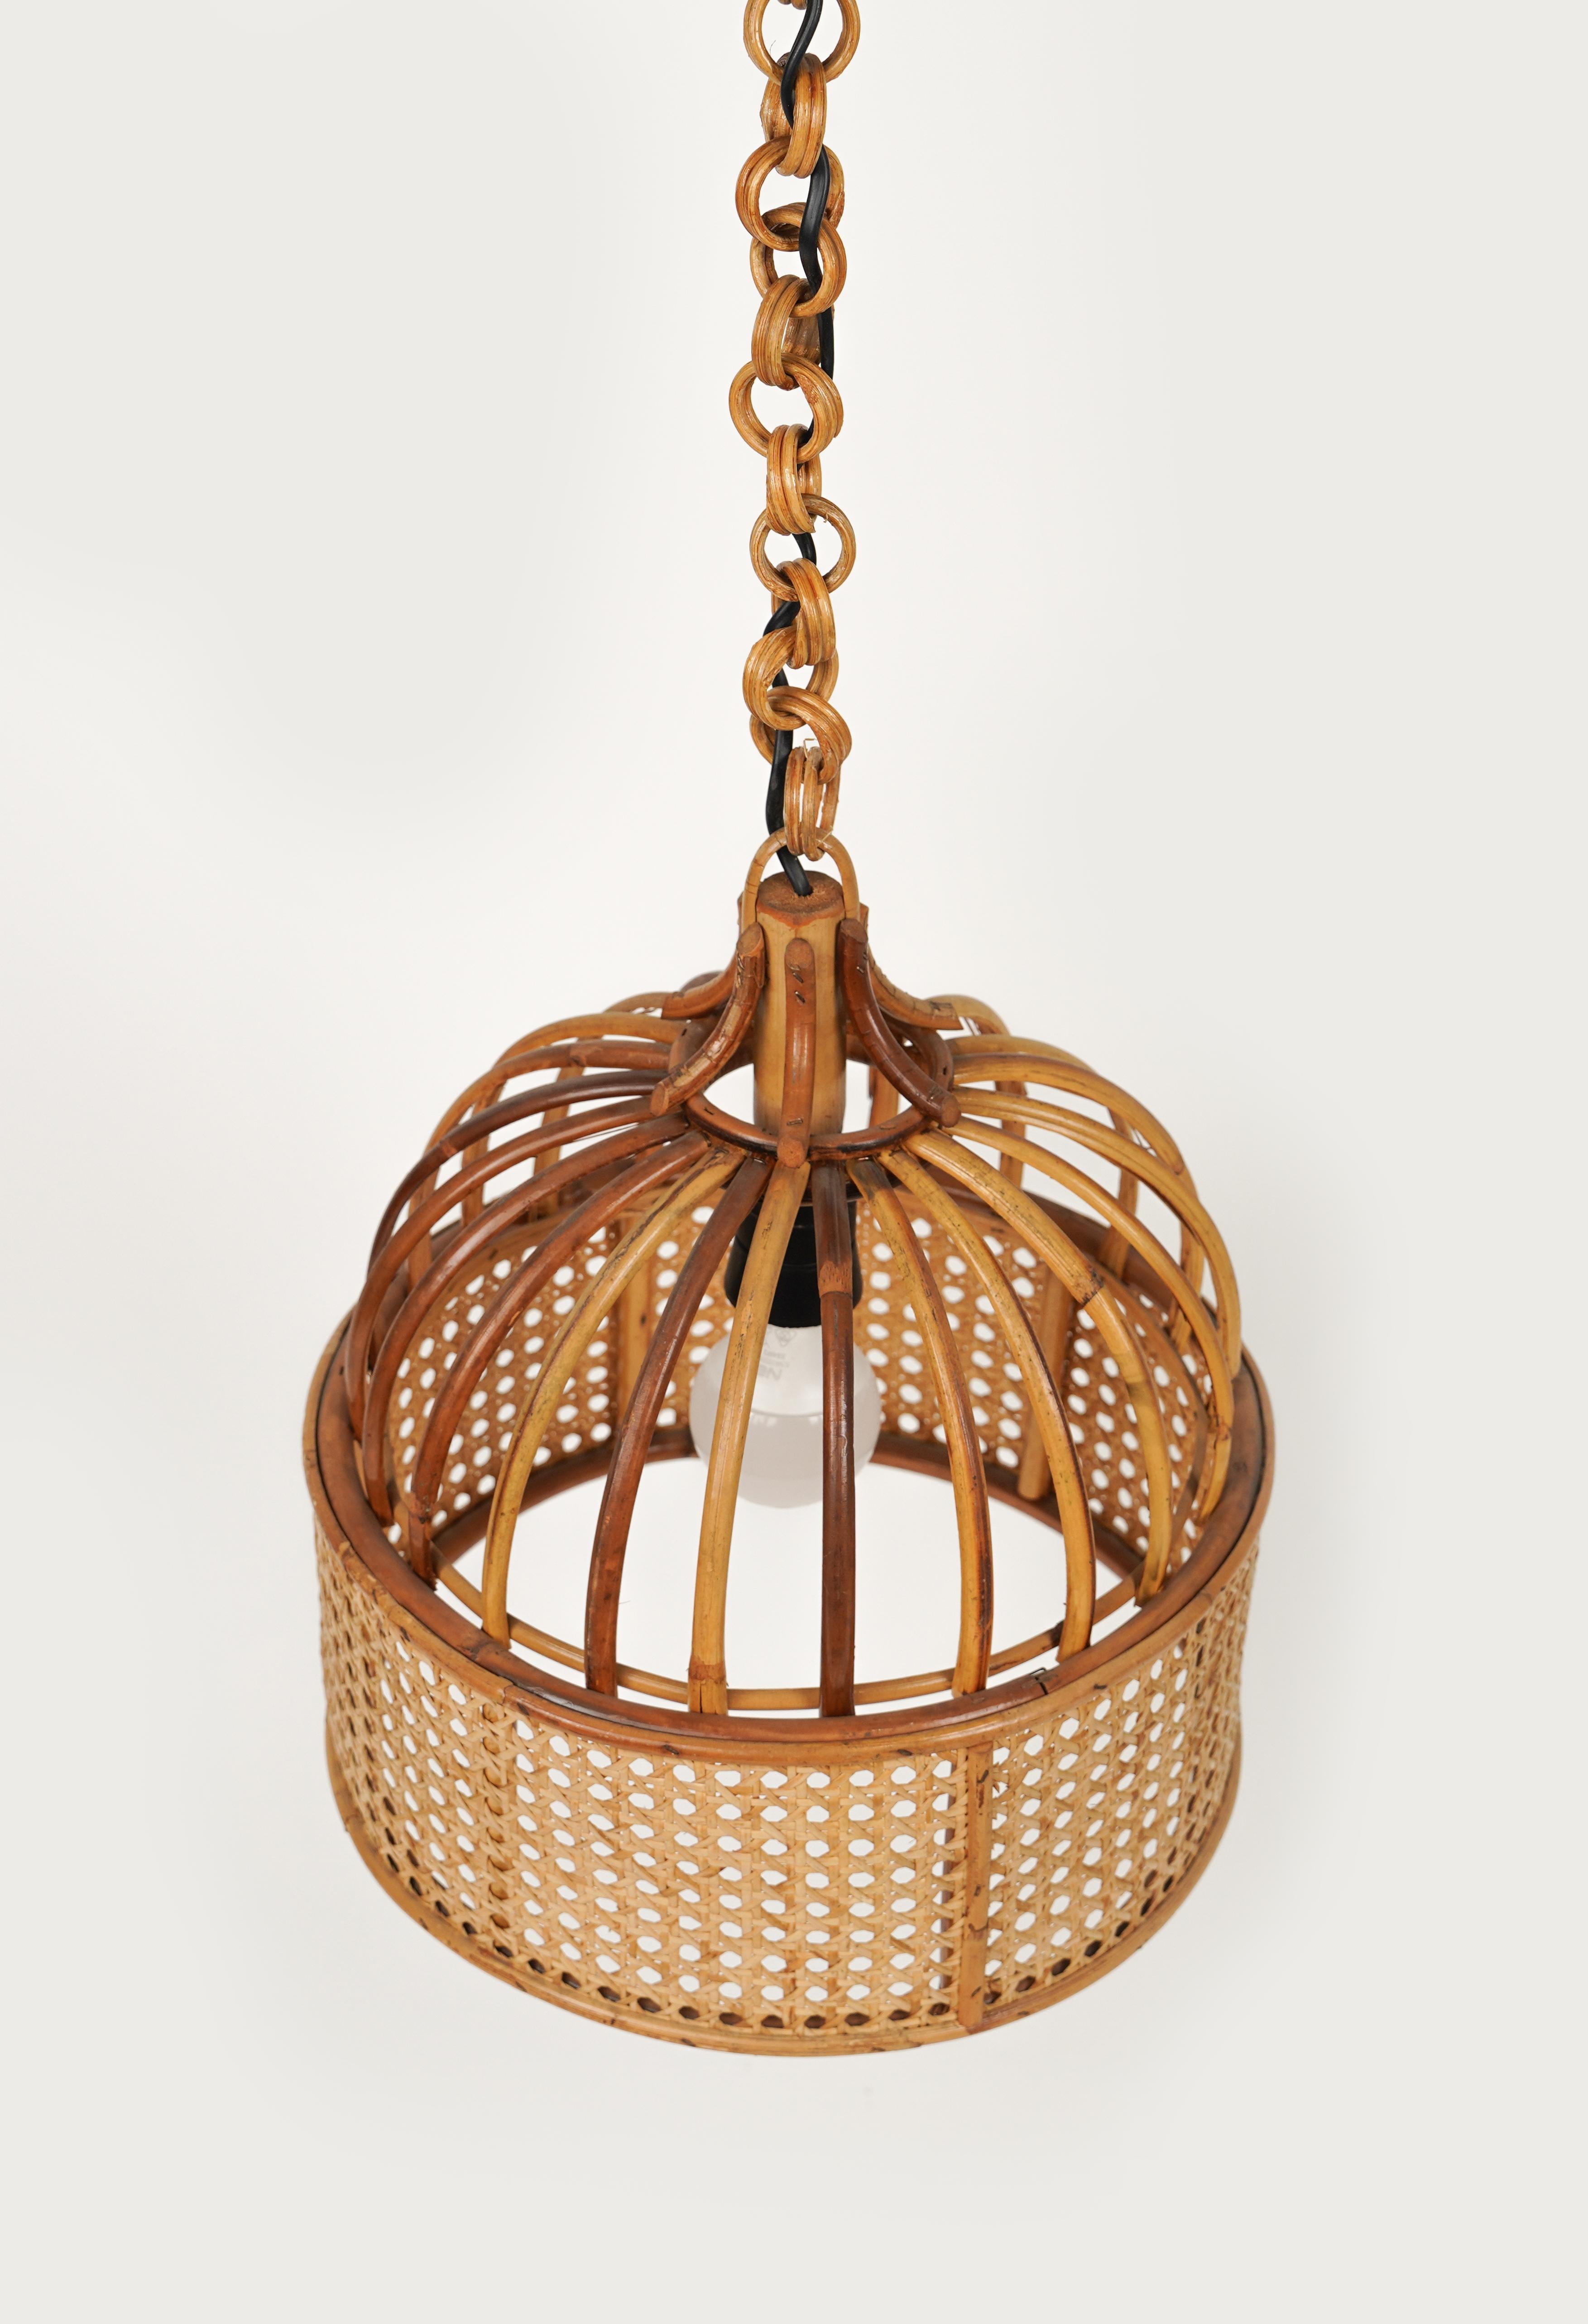 Italian Midcentury French Riviera Rattan and Wicker Chandelier, Italy 1970s For Sale